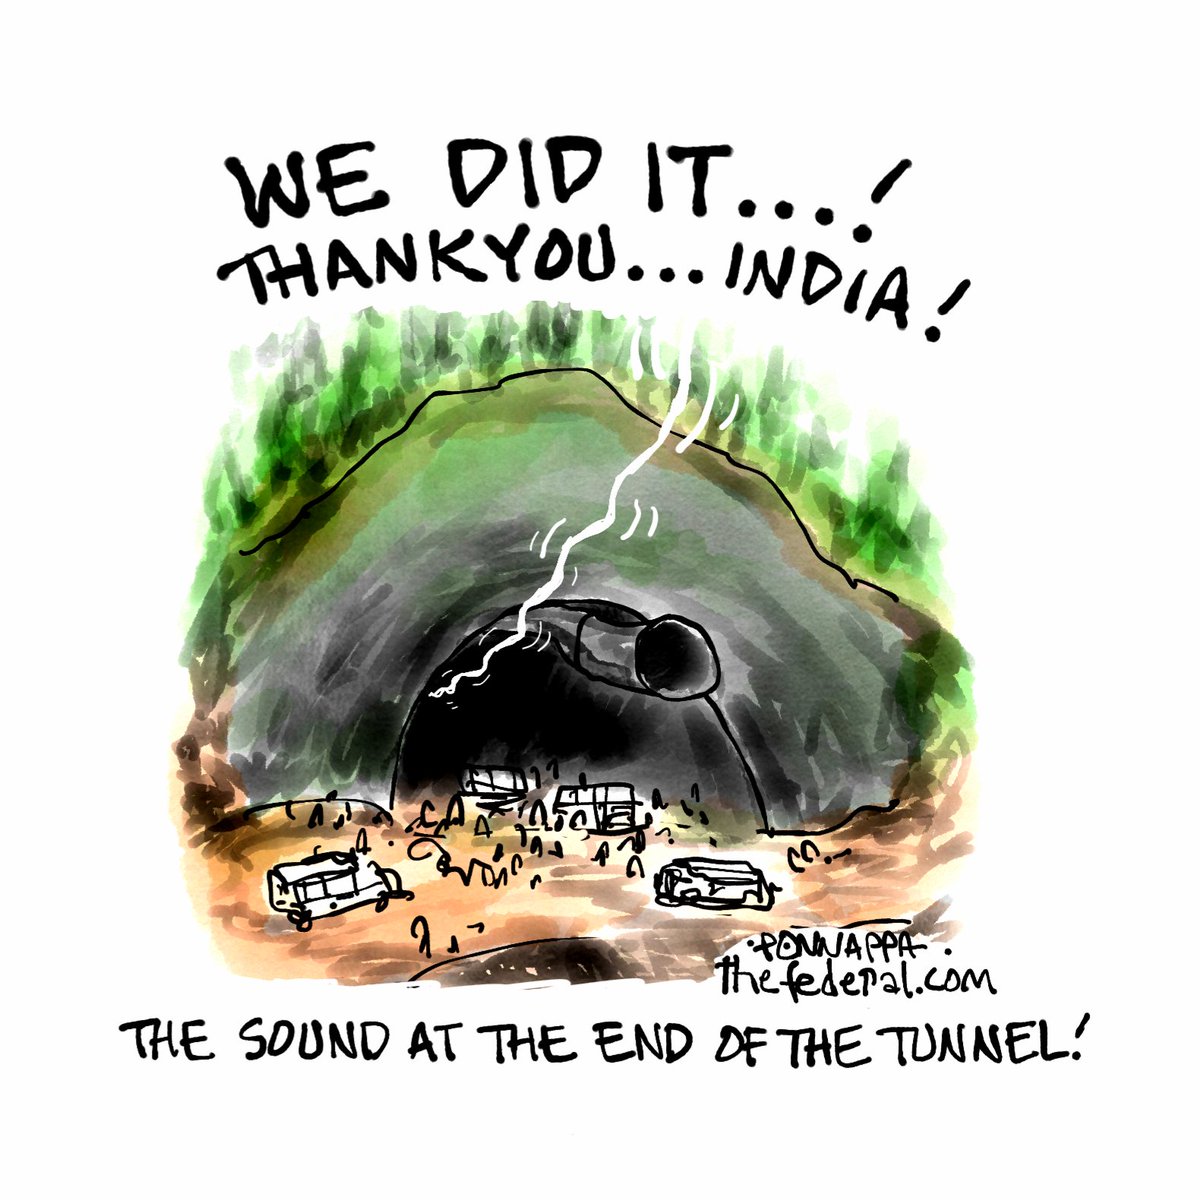 #Rescue #Tunnel #TunnelCollapsed #TunnelTragedy #UttarkashiRescue #uttarkashirescueoperation #UttarkashiRescueUpdate #silkyara #Miners #India #saved